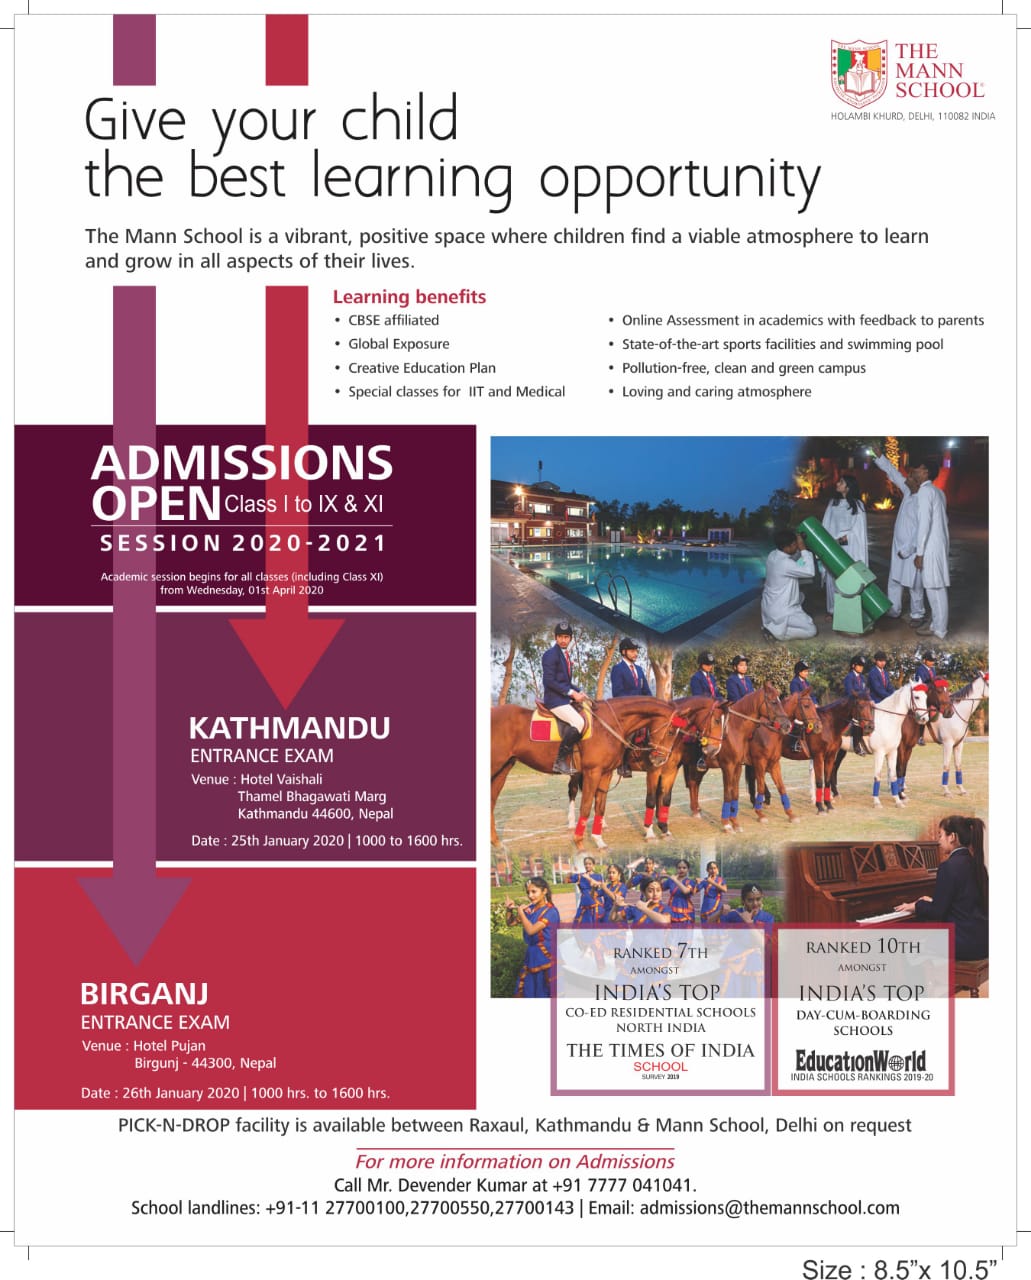 The Mann School Nepal Admissions 2020